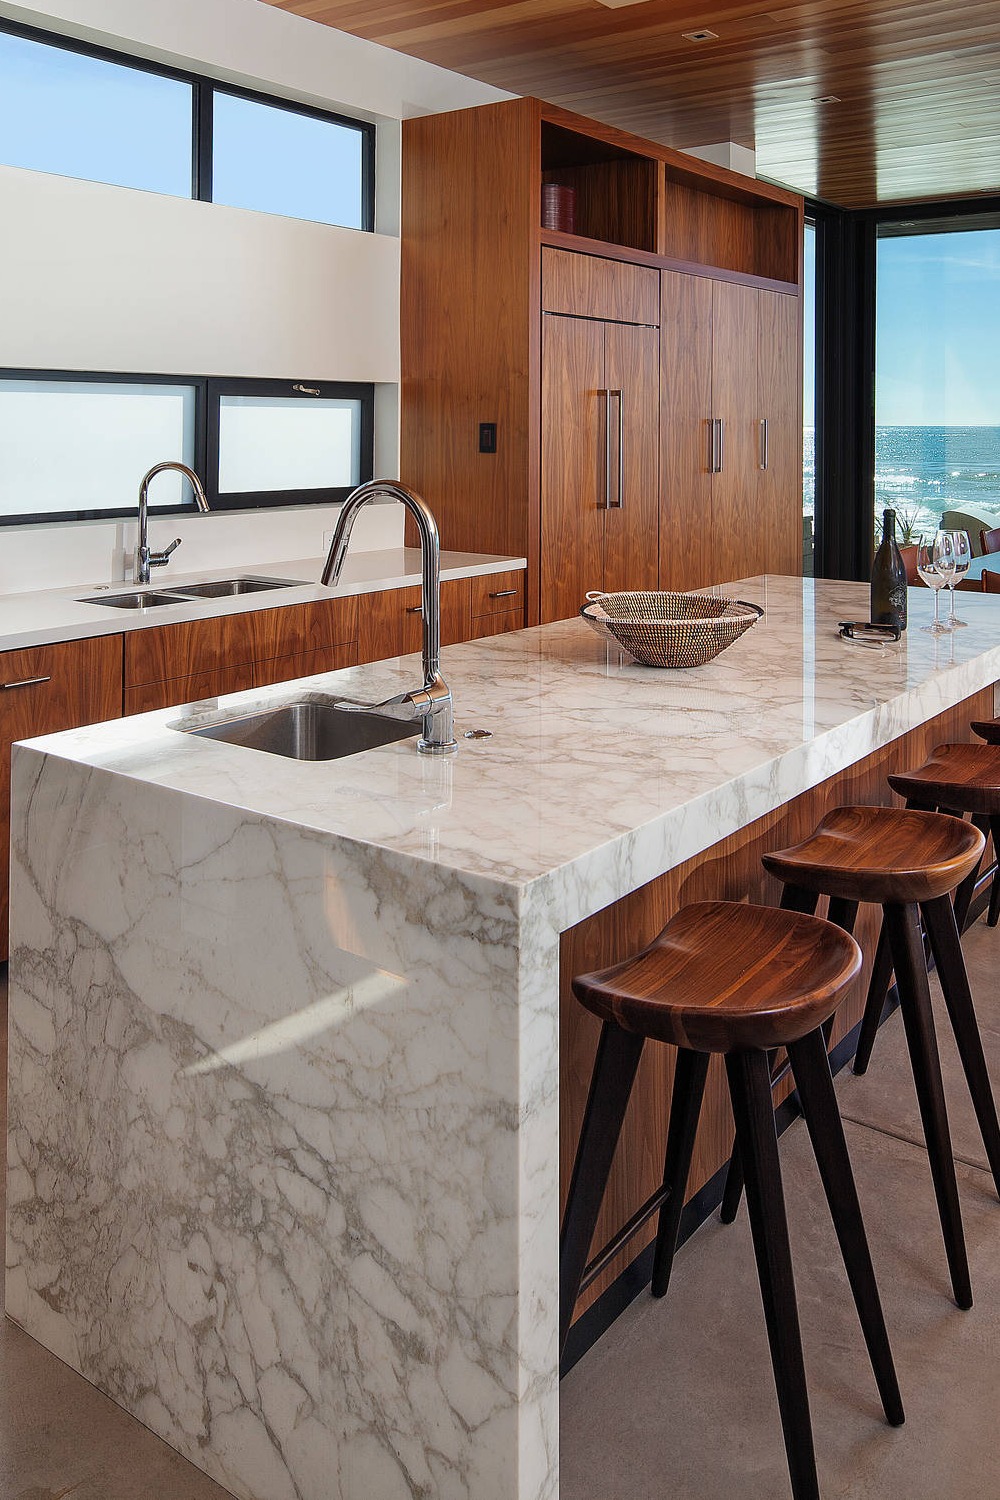 Large Format Concrete Floors Marble Counters Brown Cabinet